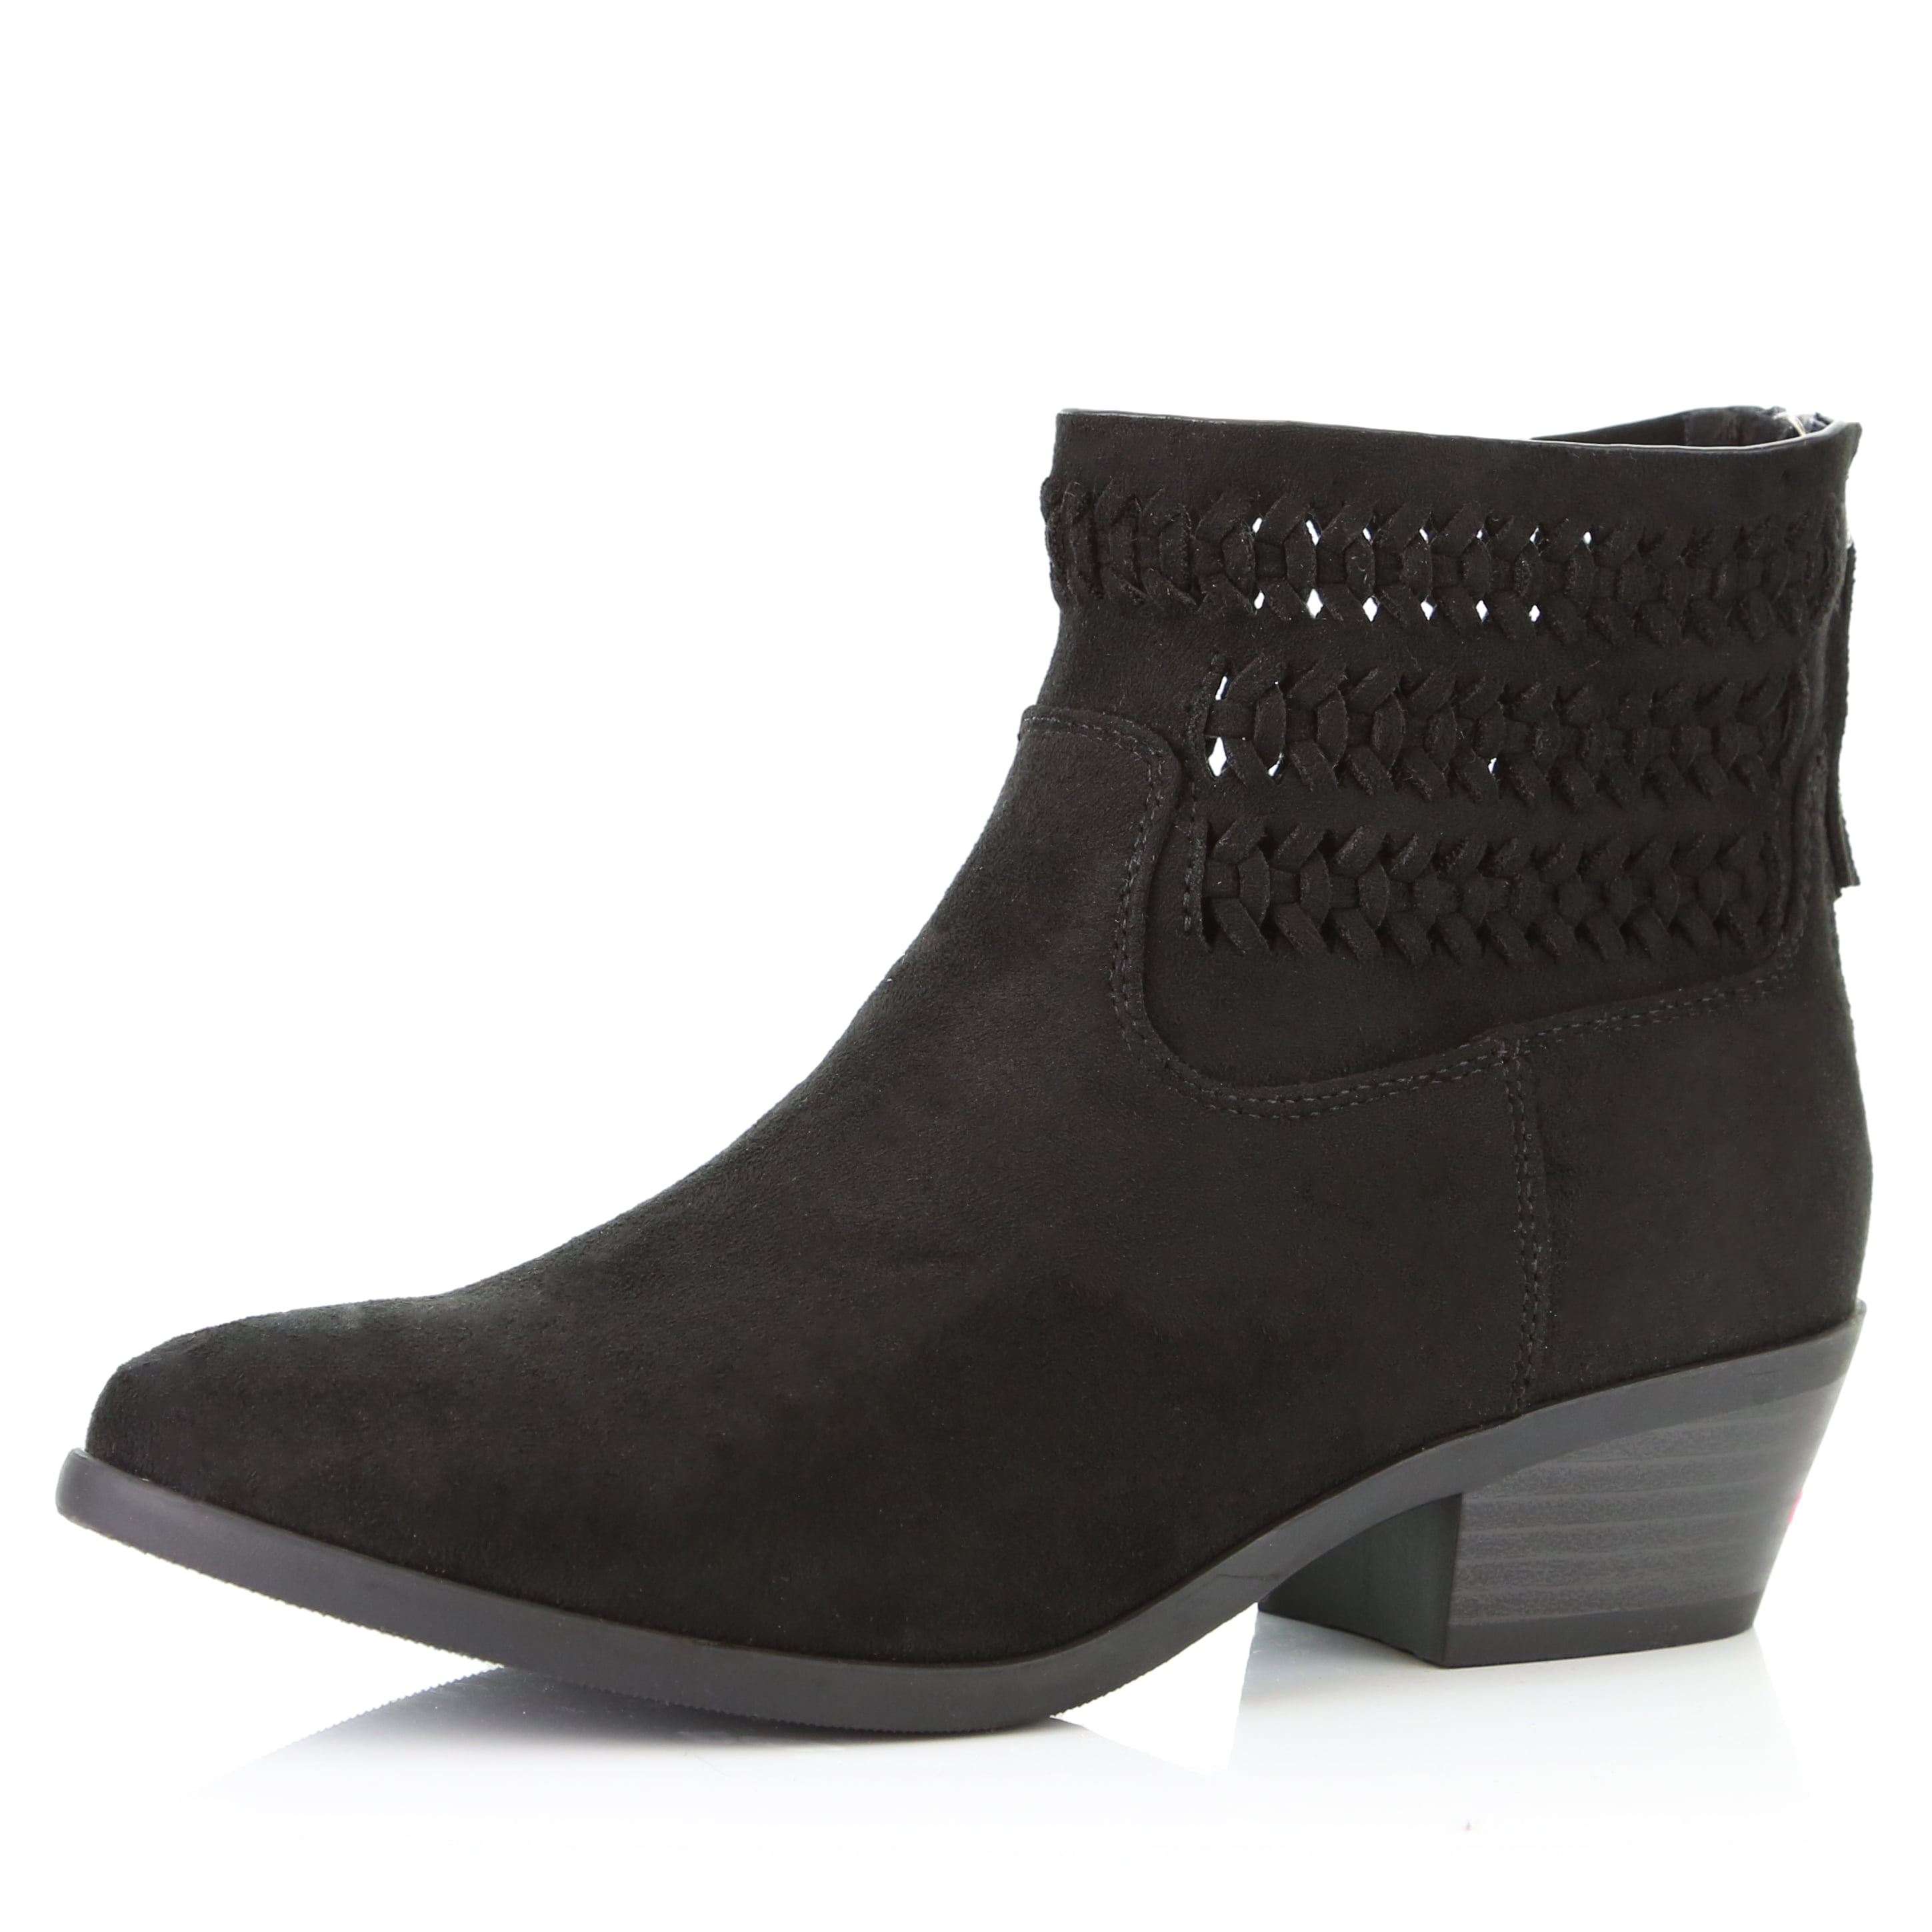 DailyShoes - Dailyshoes Women's Low Heel Ankle Bootie Perforated Boots